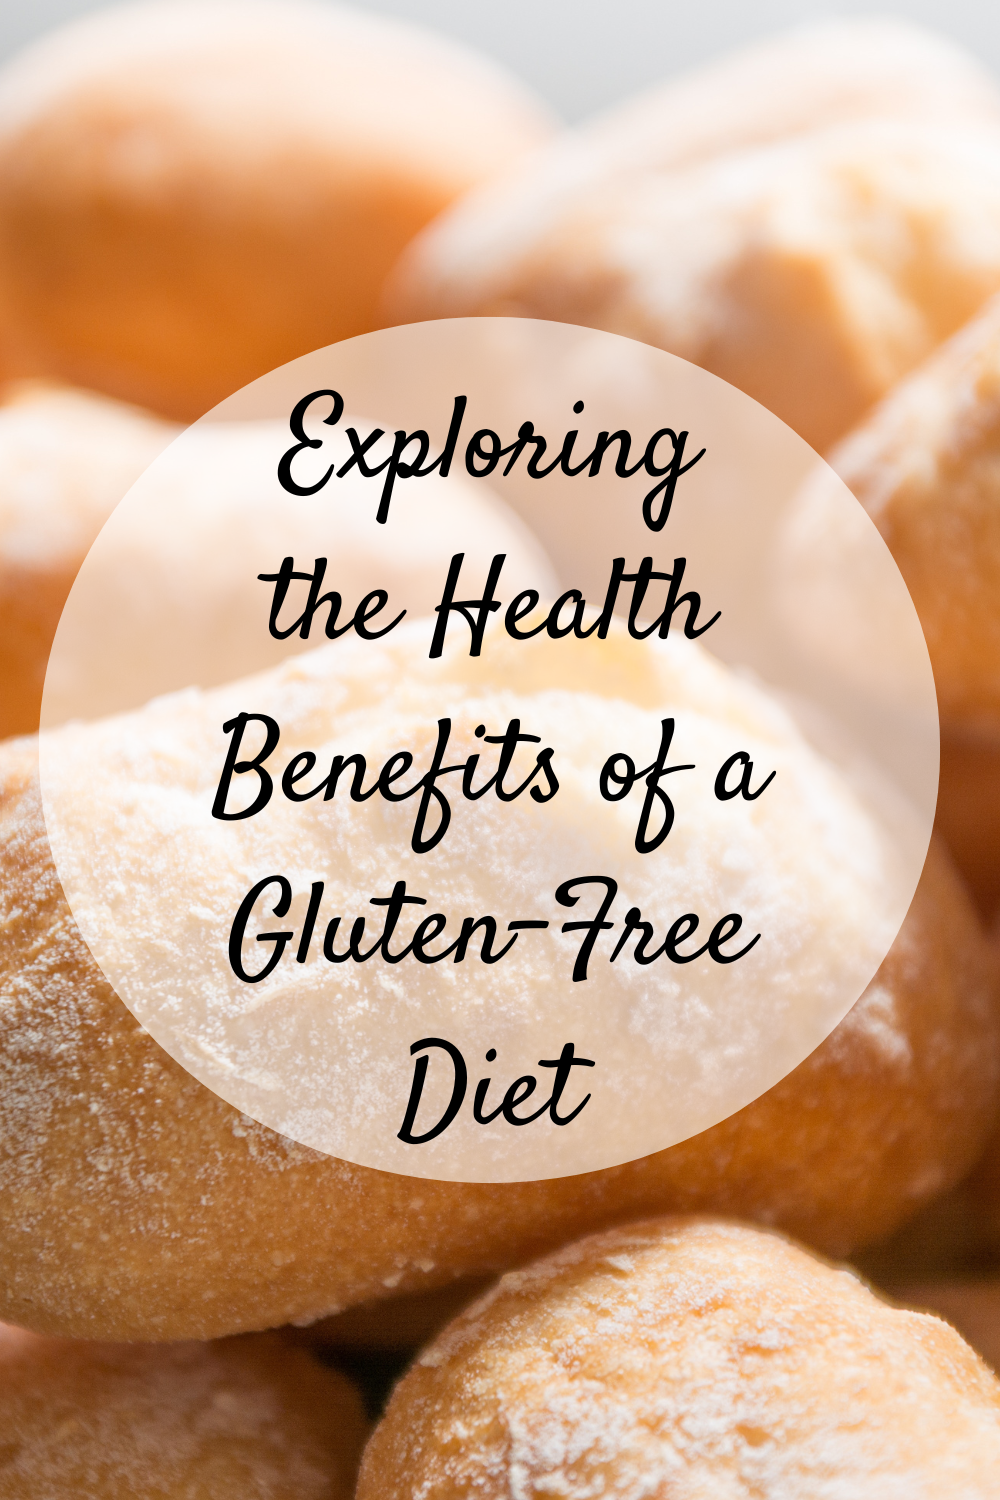 Exploring the Health Benefits of a Gluten-Free Diet